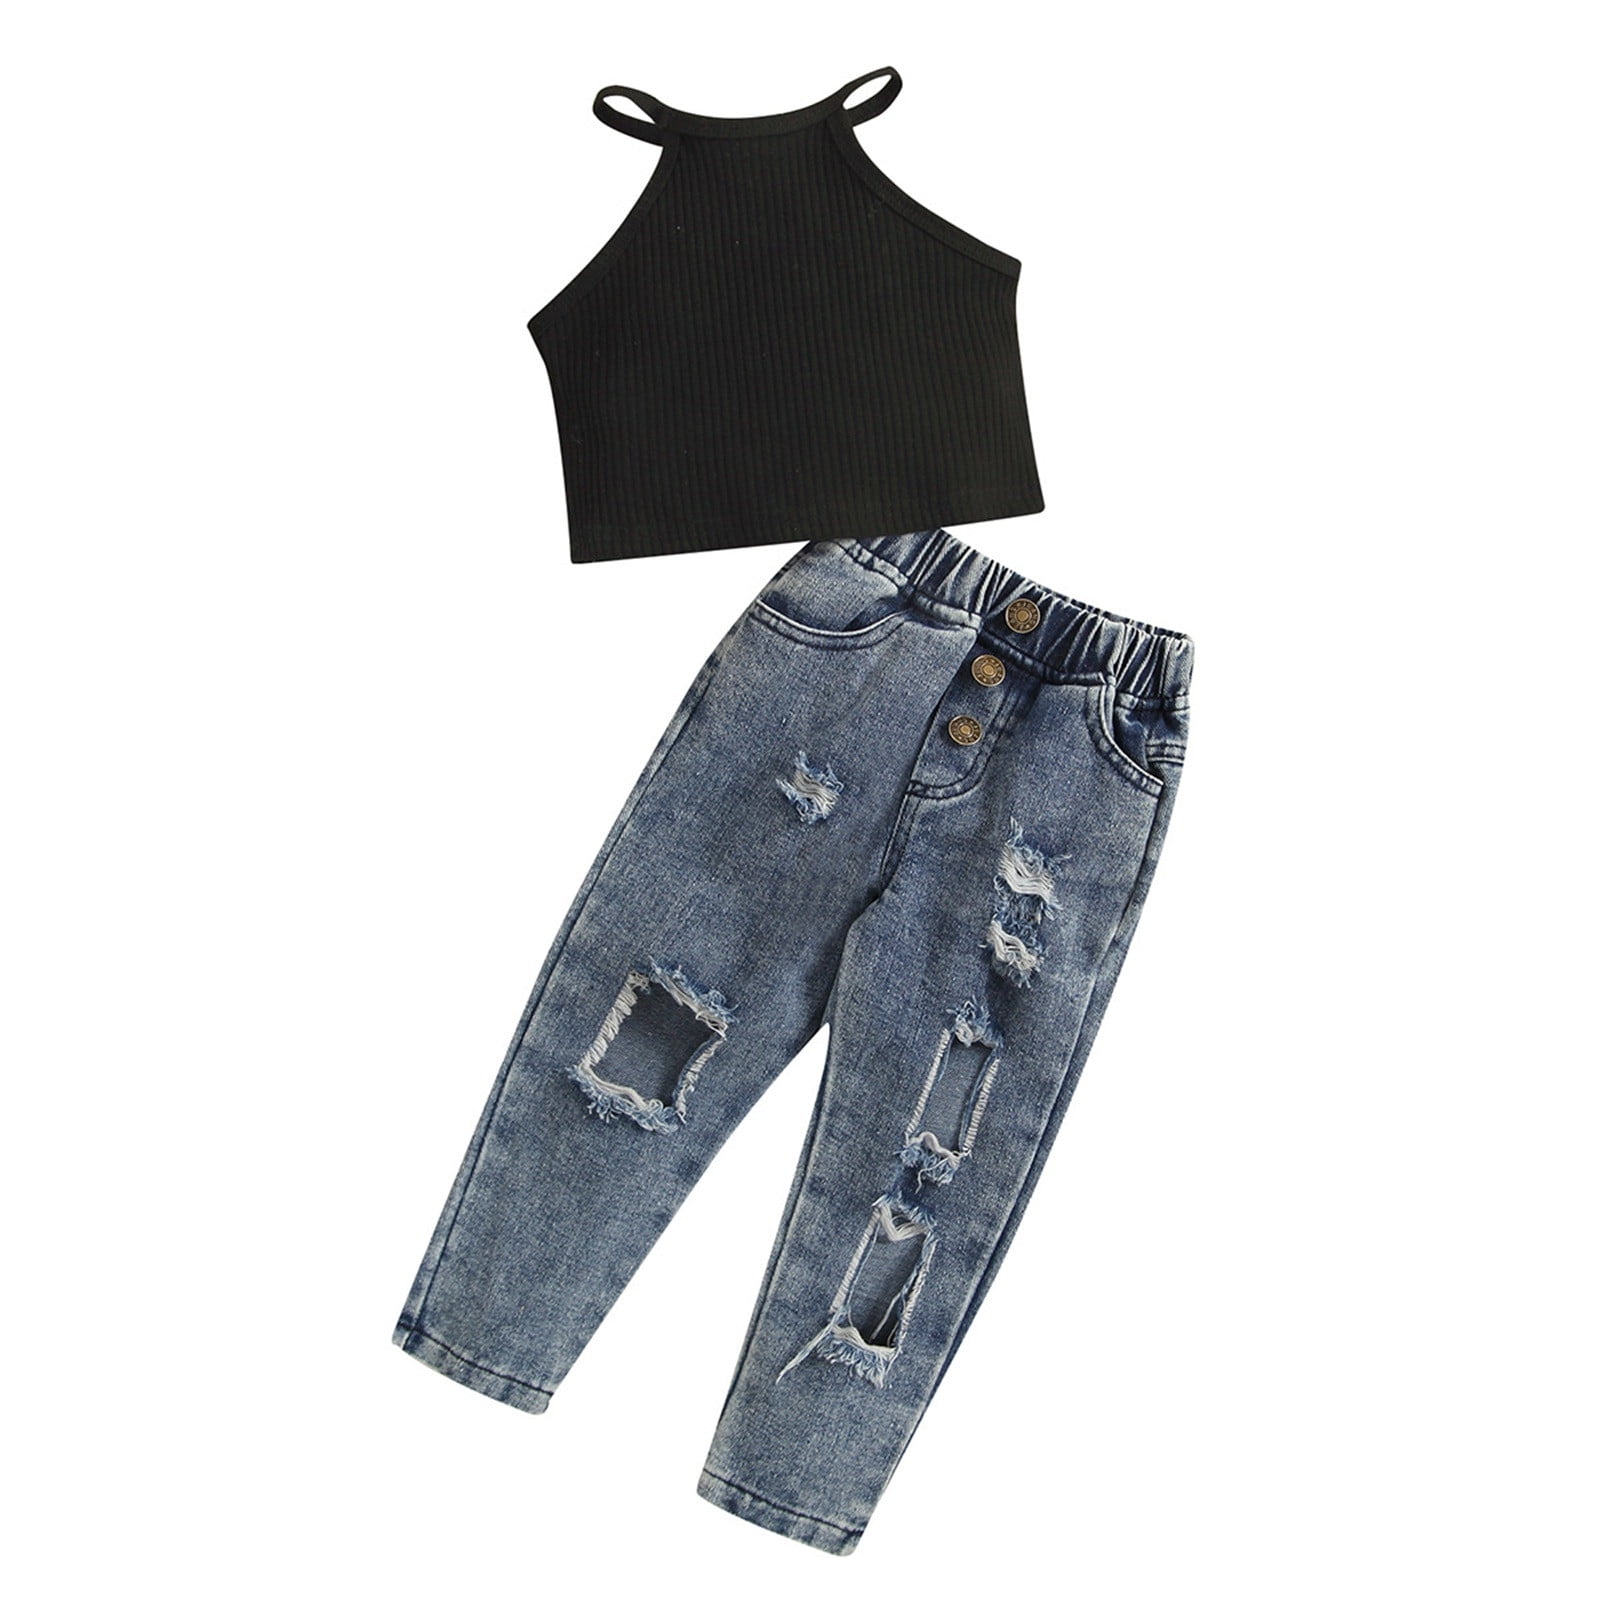 Women's Clothing, Jeans, Shirts & Apparel